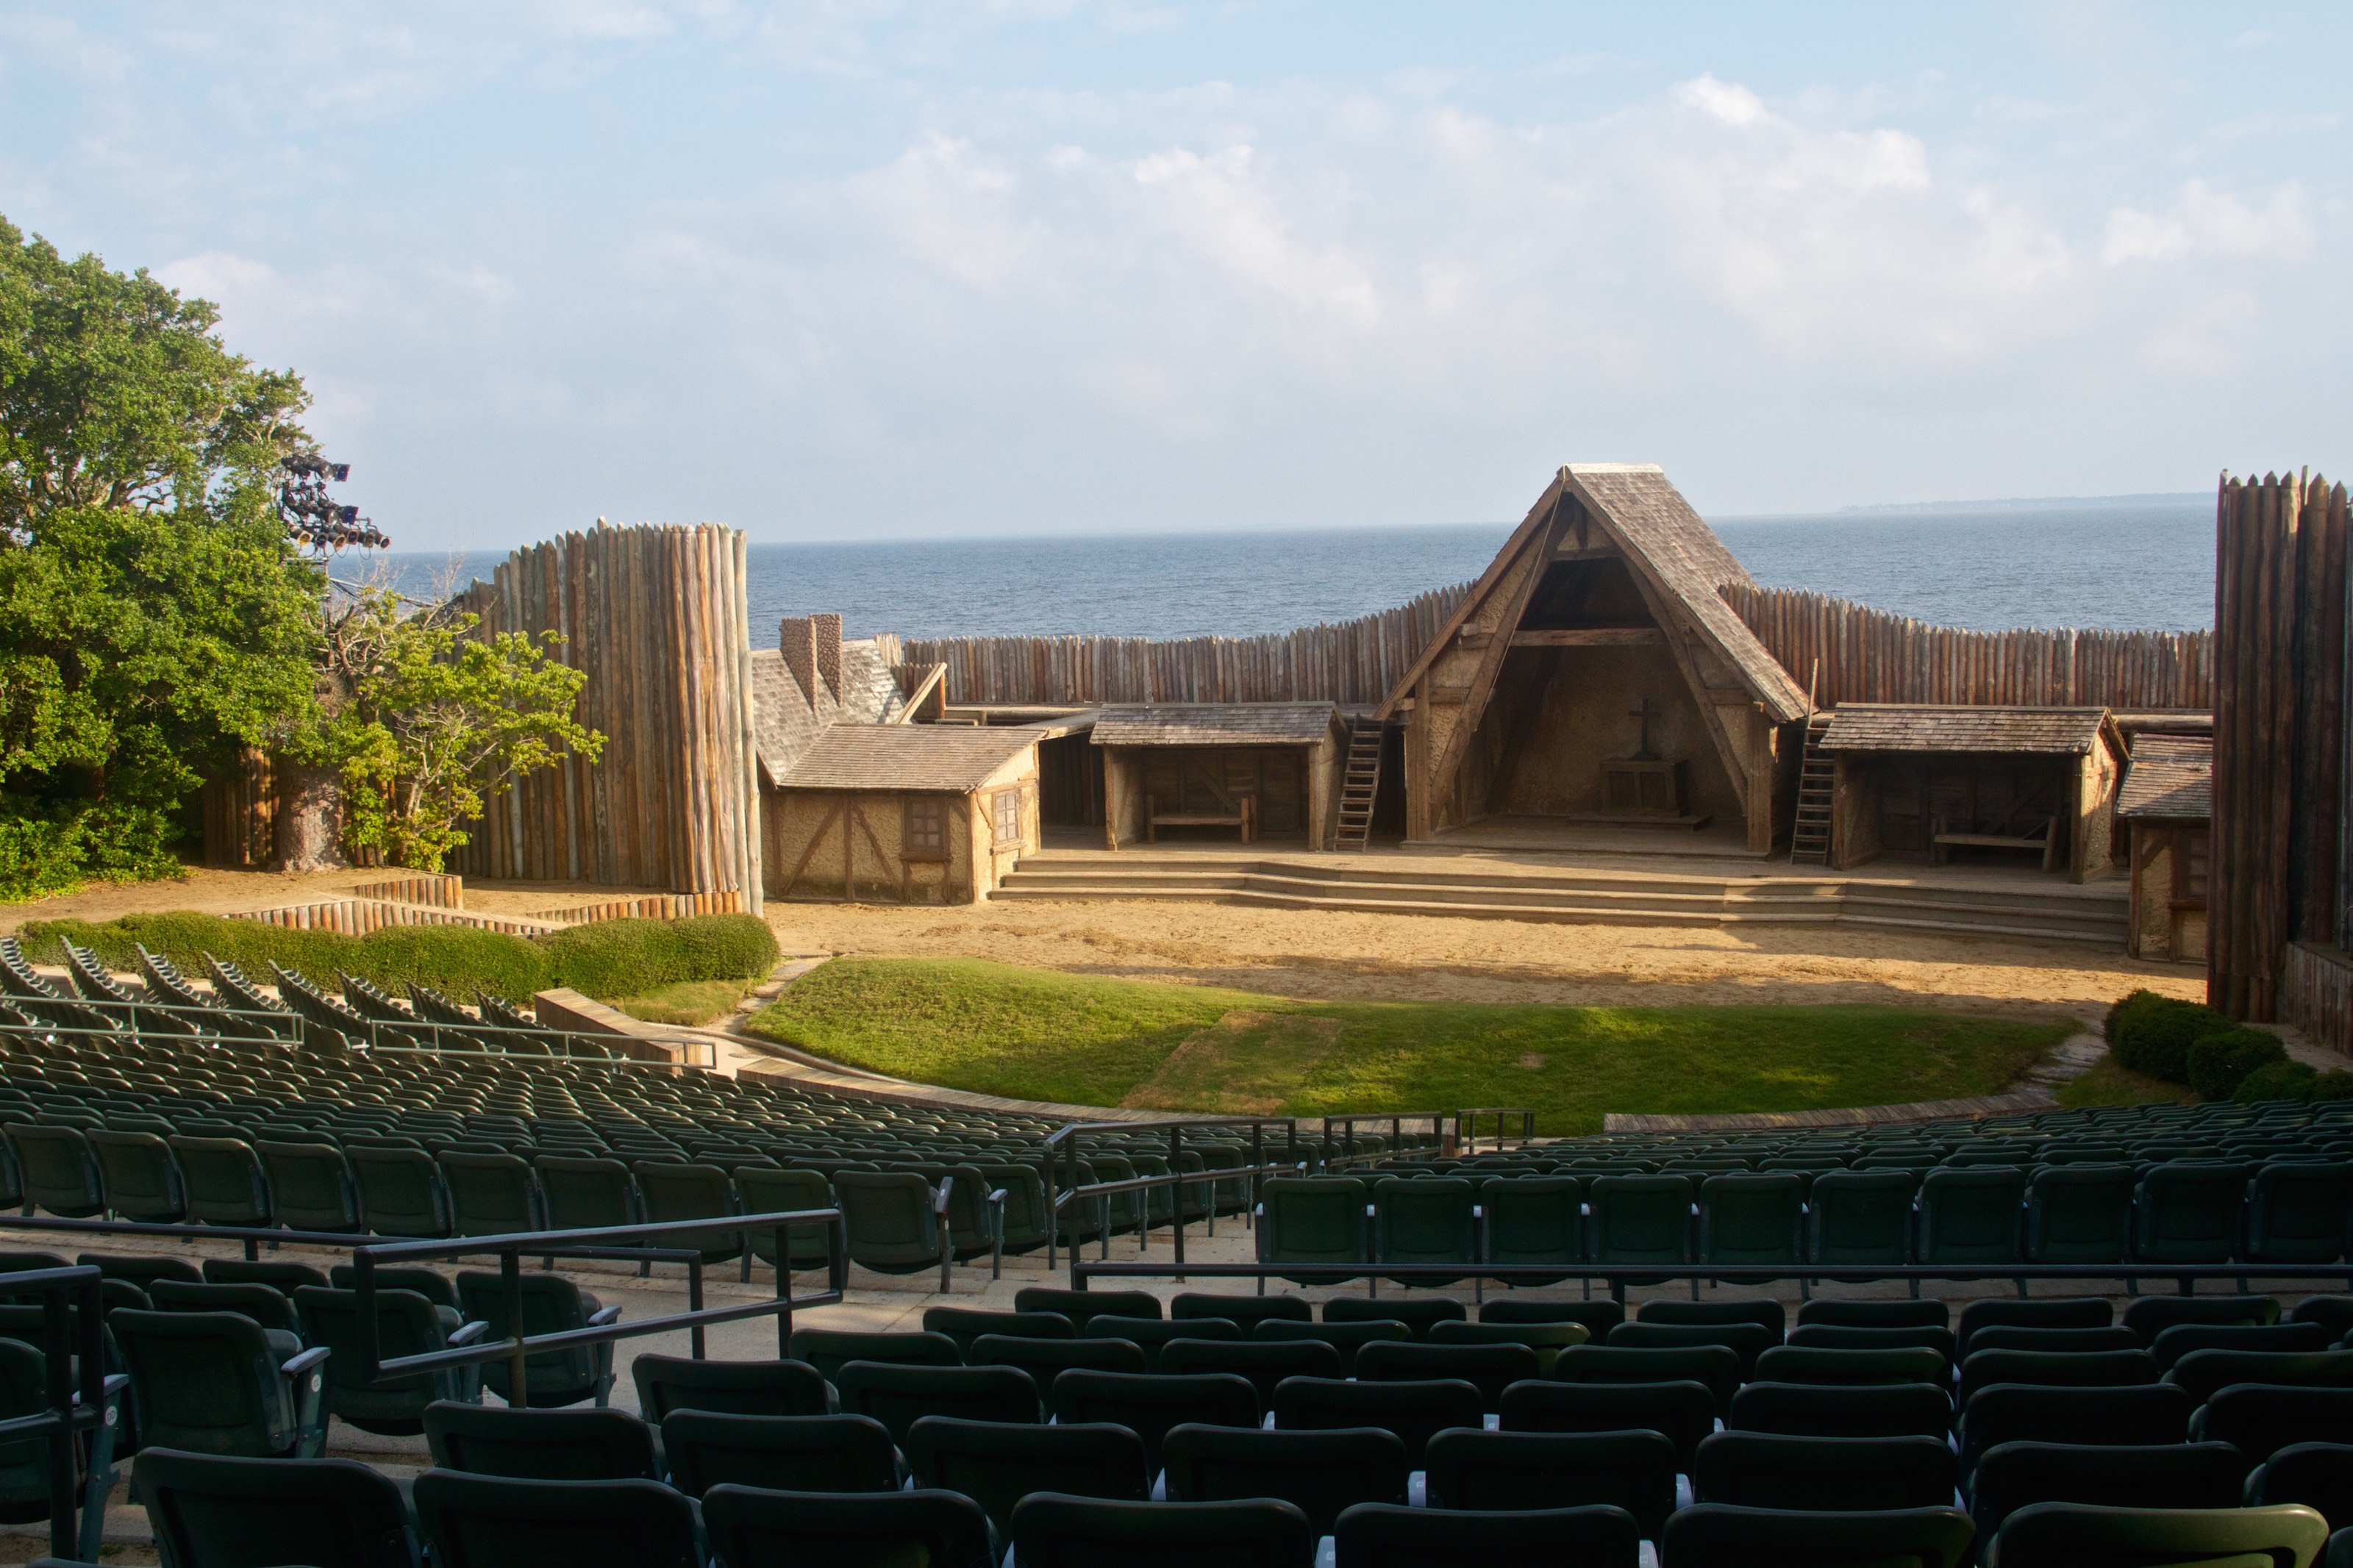 Stage of the Waterside Theatre with a view of the Roanoke Sound in the background